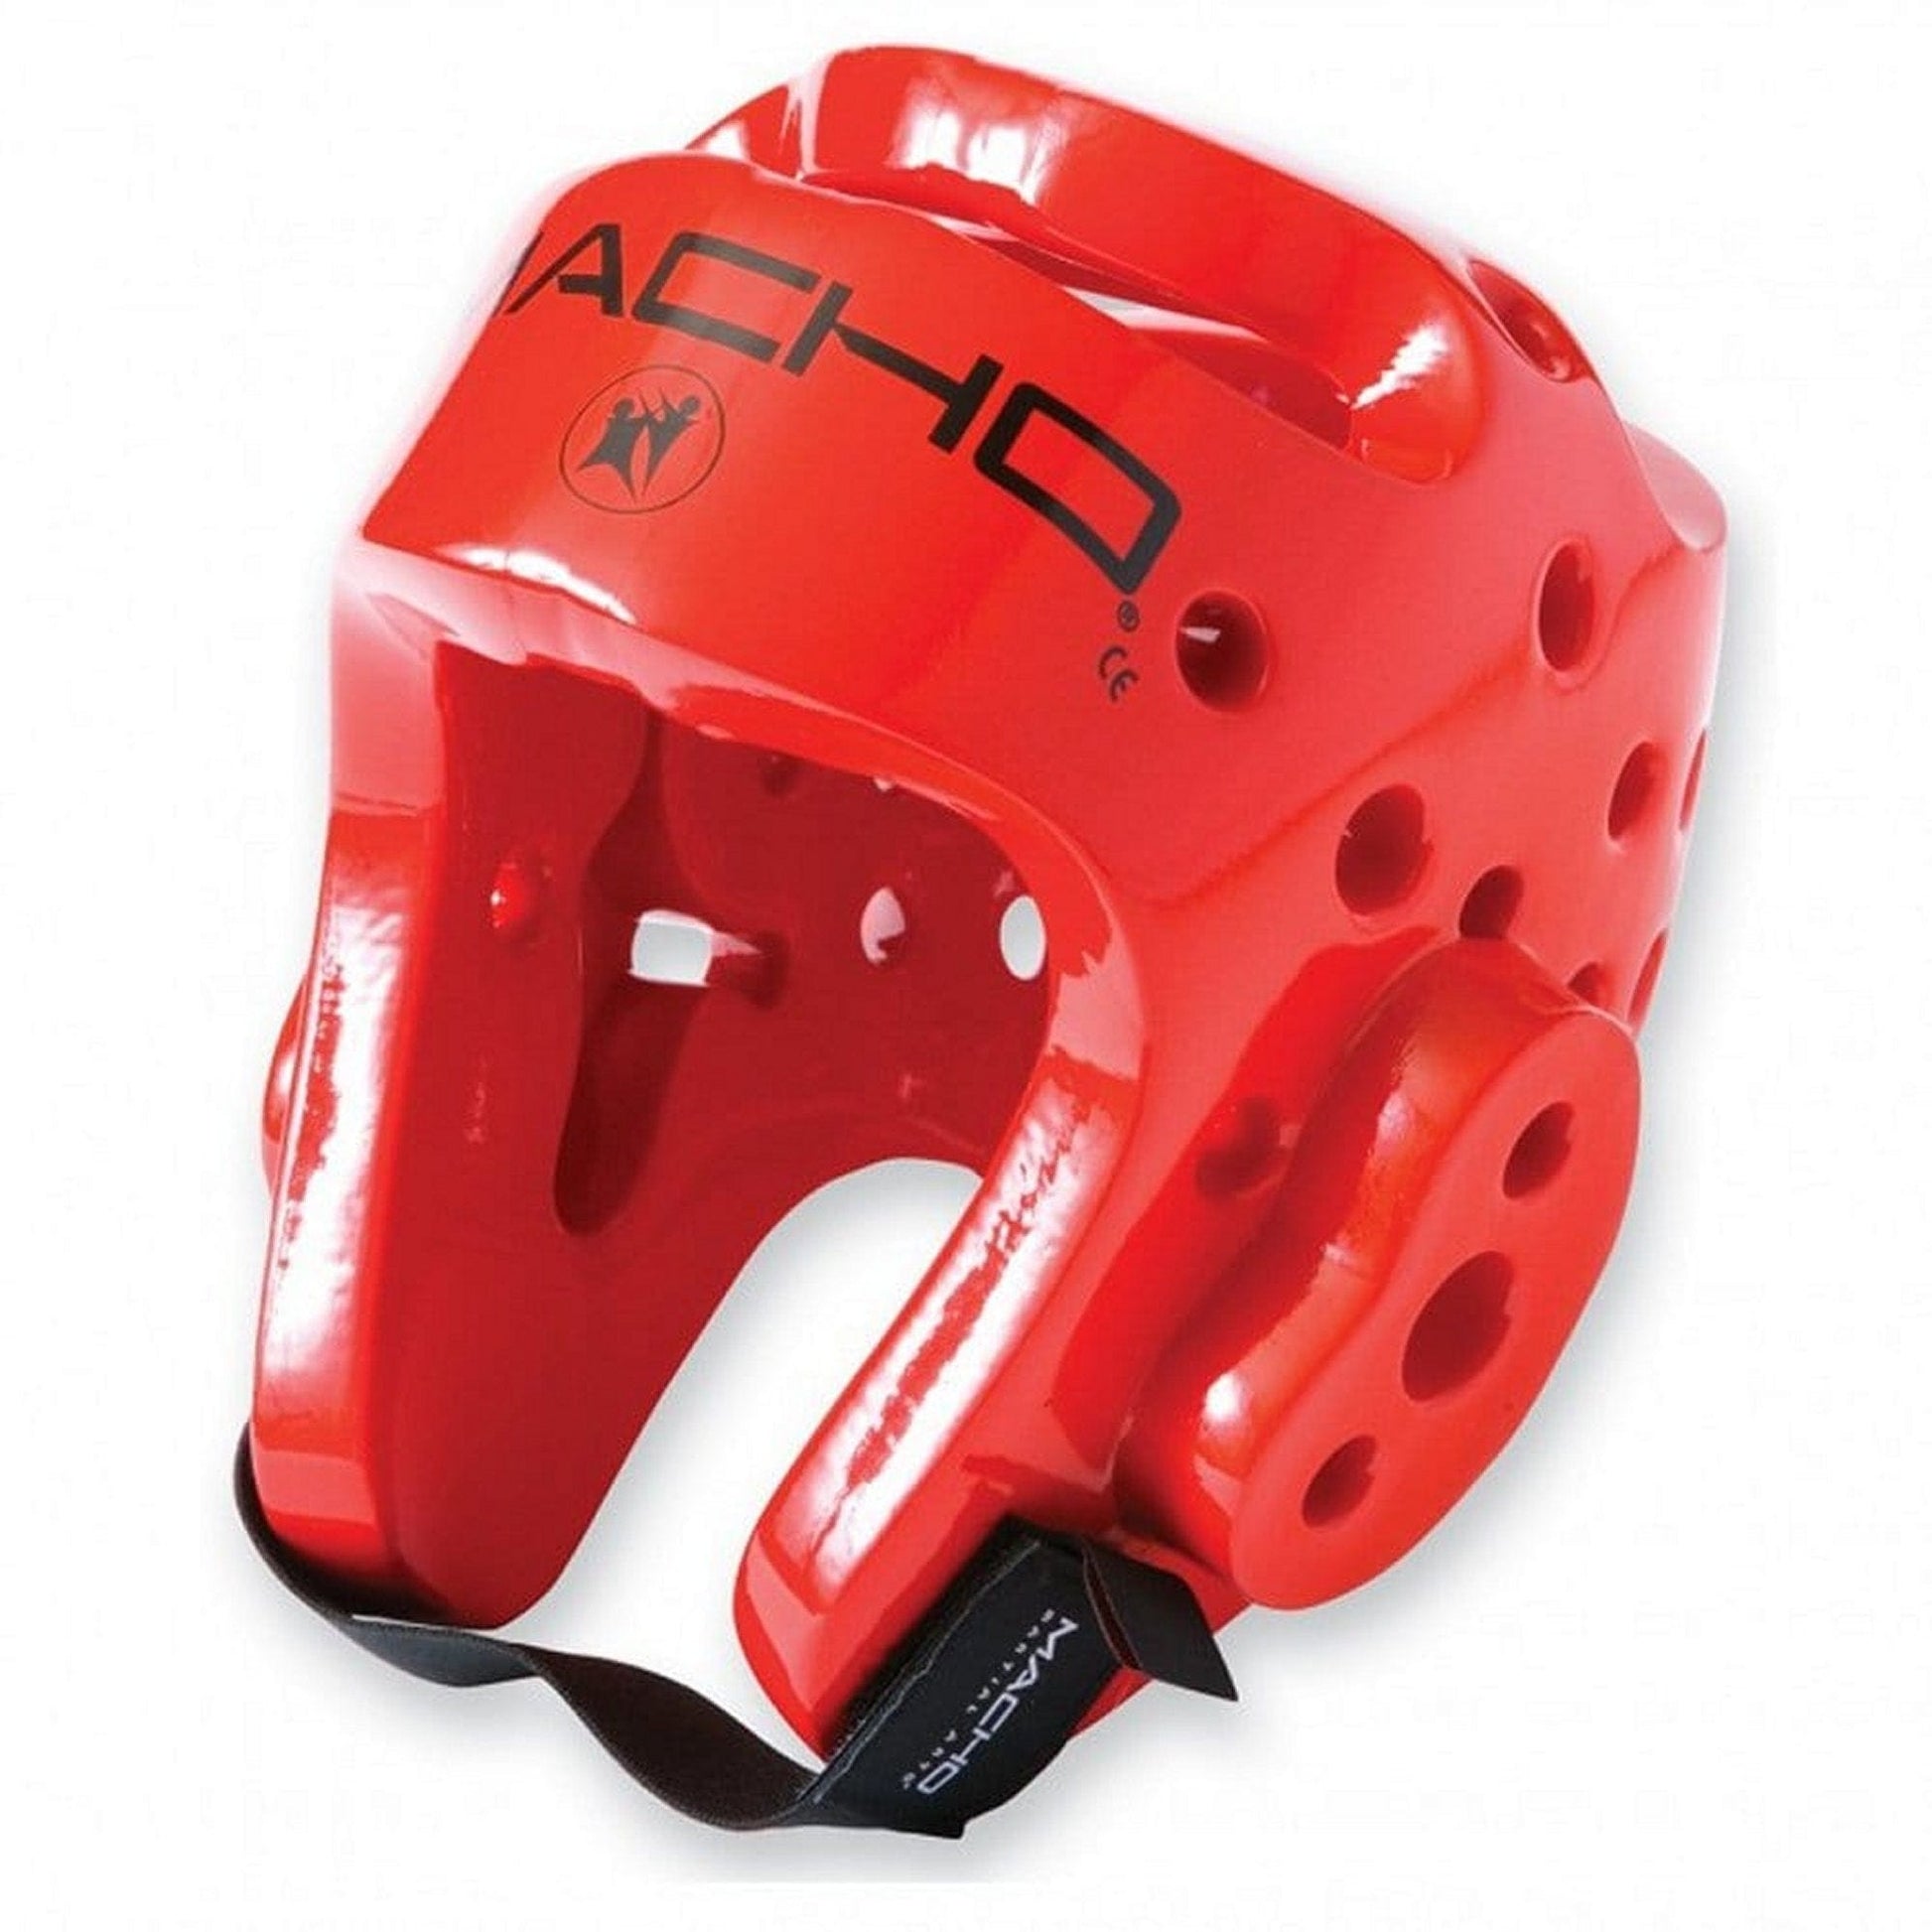 EclipseMartialArtsSupplies sporting goods Red / small Macho Dyna Martial Arts Sparring head gear